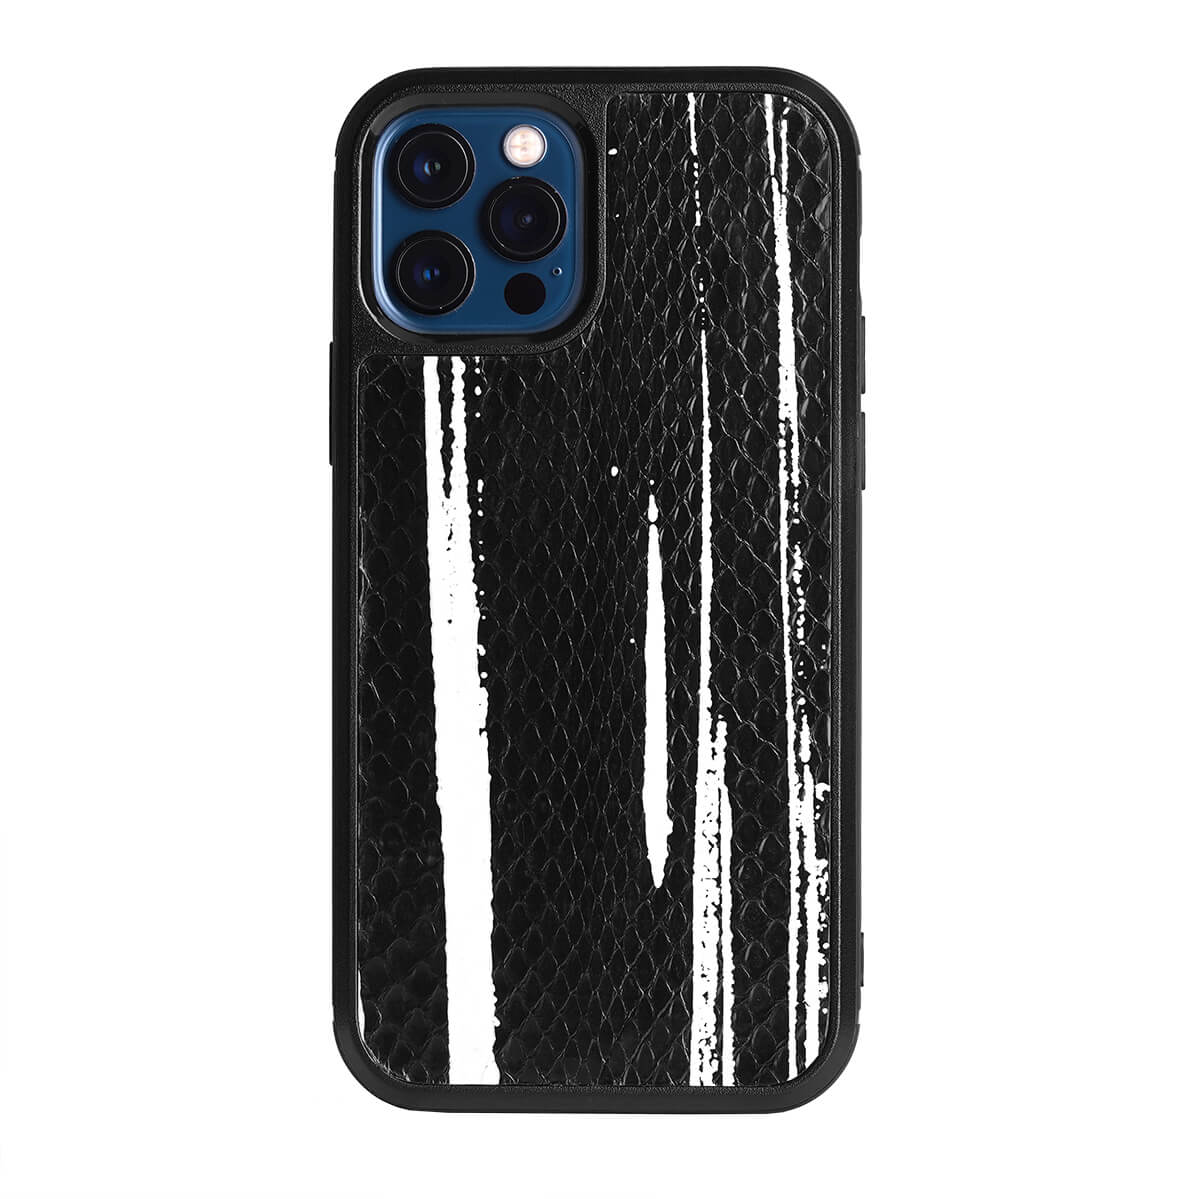 IPHONE 12 CASES PYTHON BLACK AND WHITE